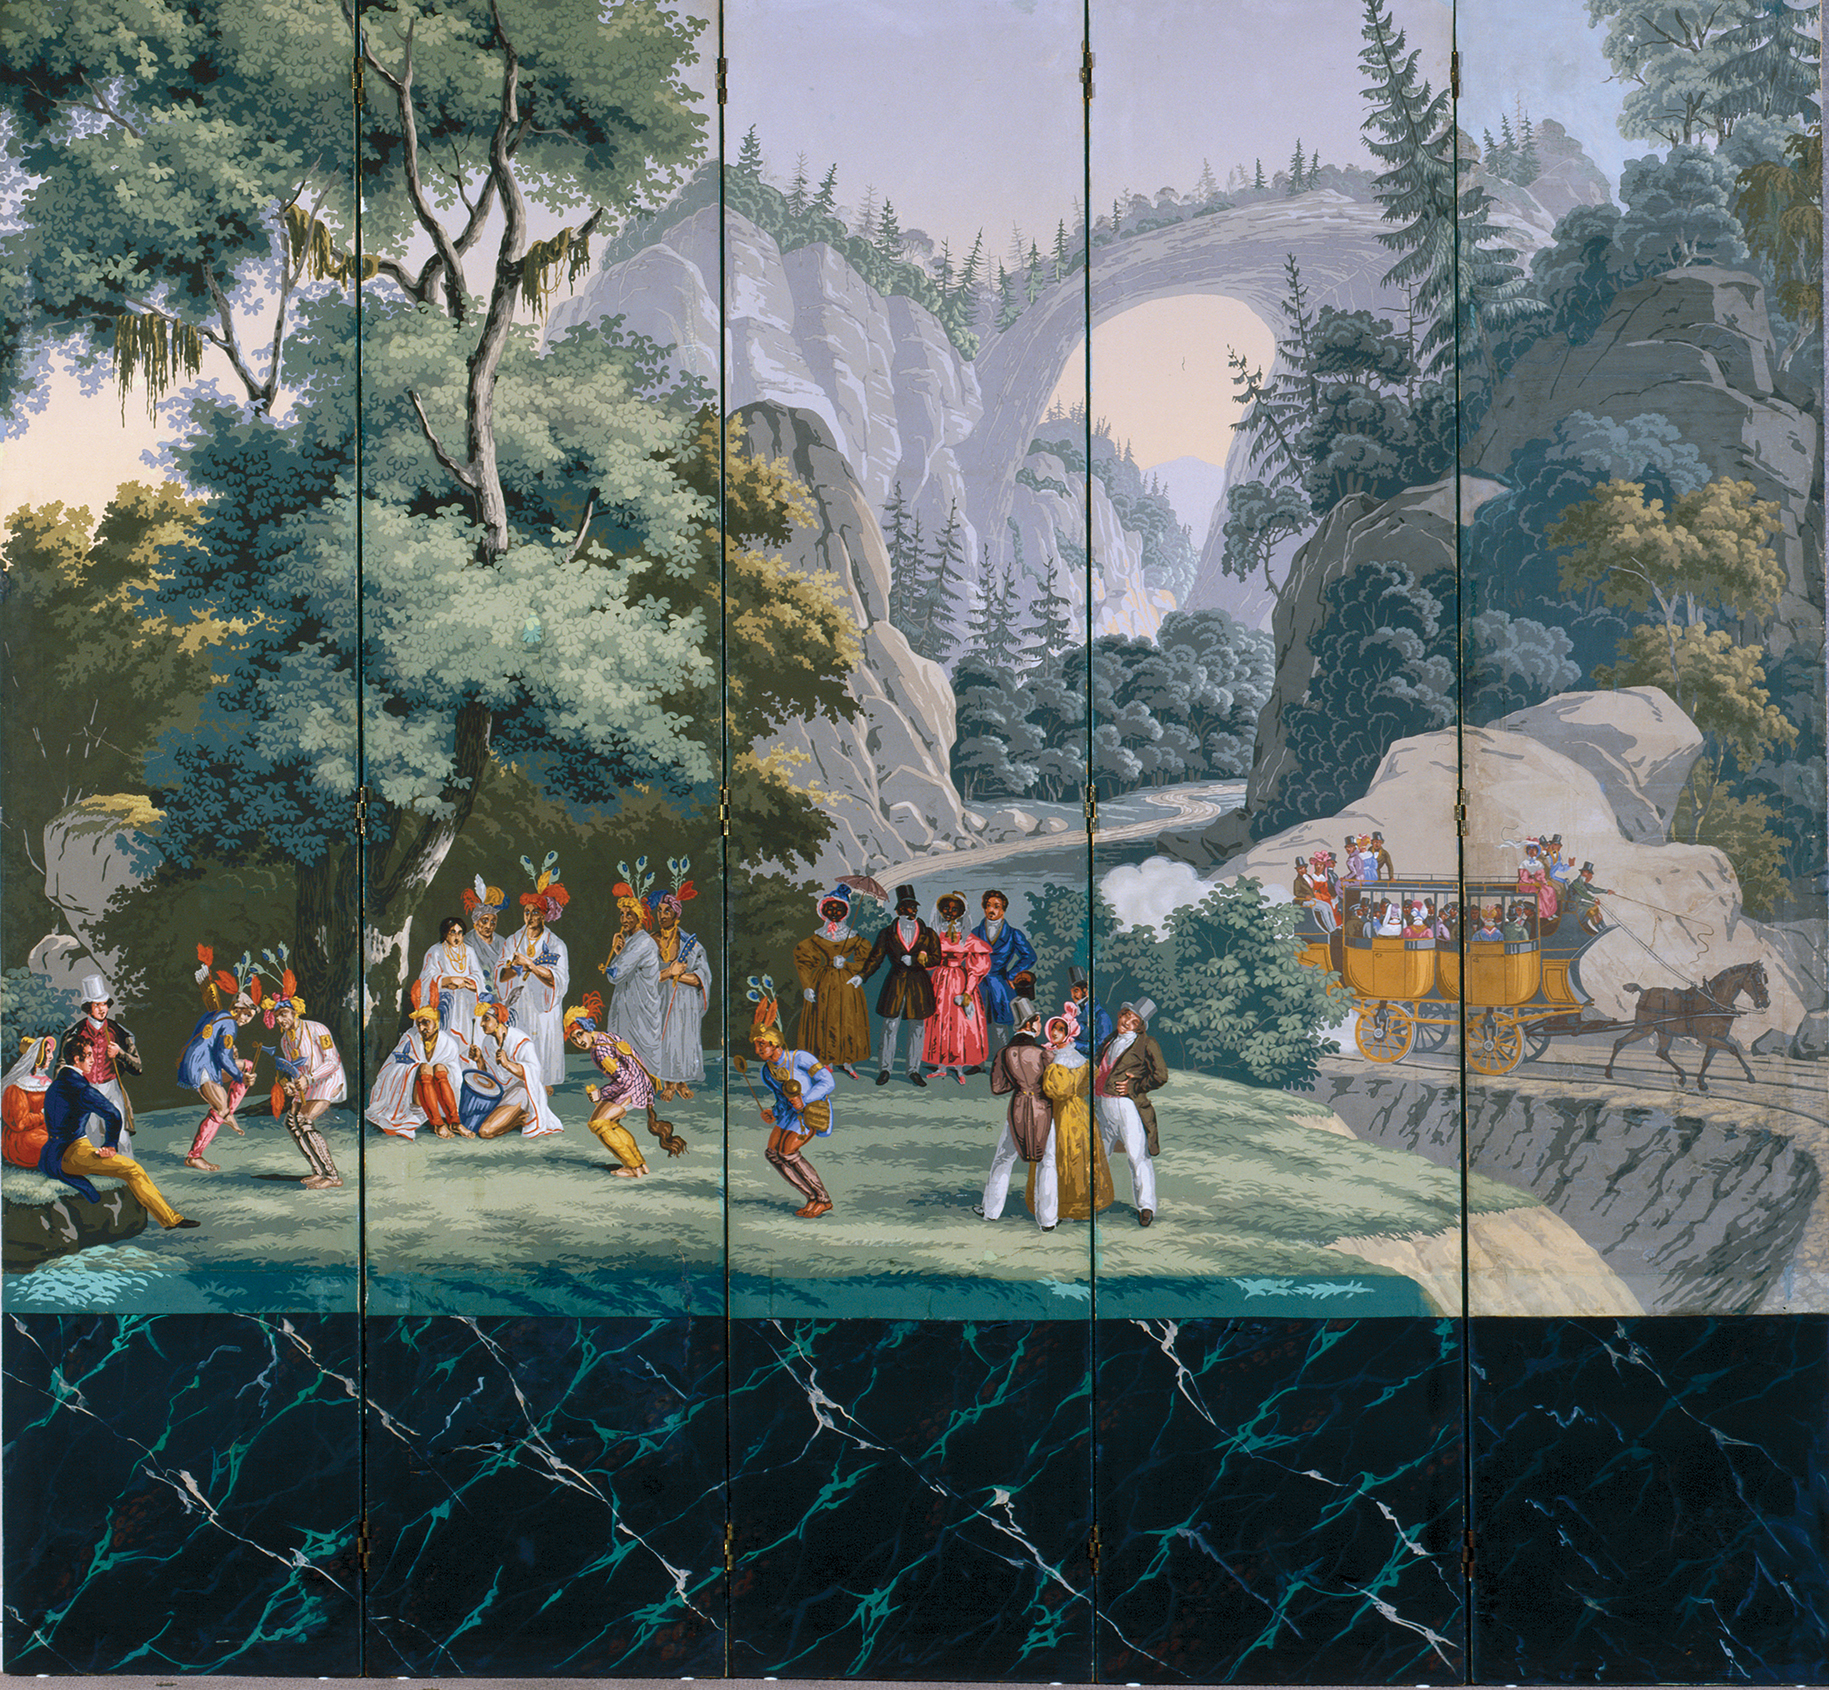 Jean-Julien Deltil, for Jean Zuber et Cie, Mulhouse, France, Virginia, 1833, hand-printed wallpaper panel Purchased with funds provided by Lora M. Robins 